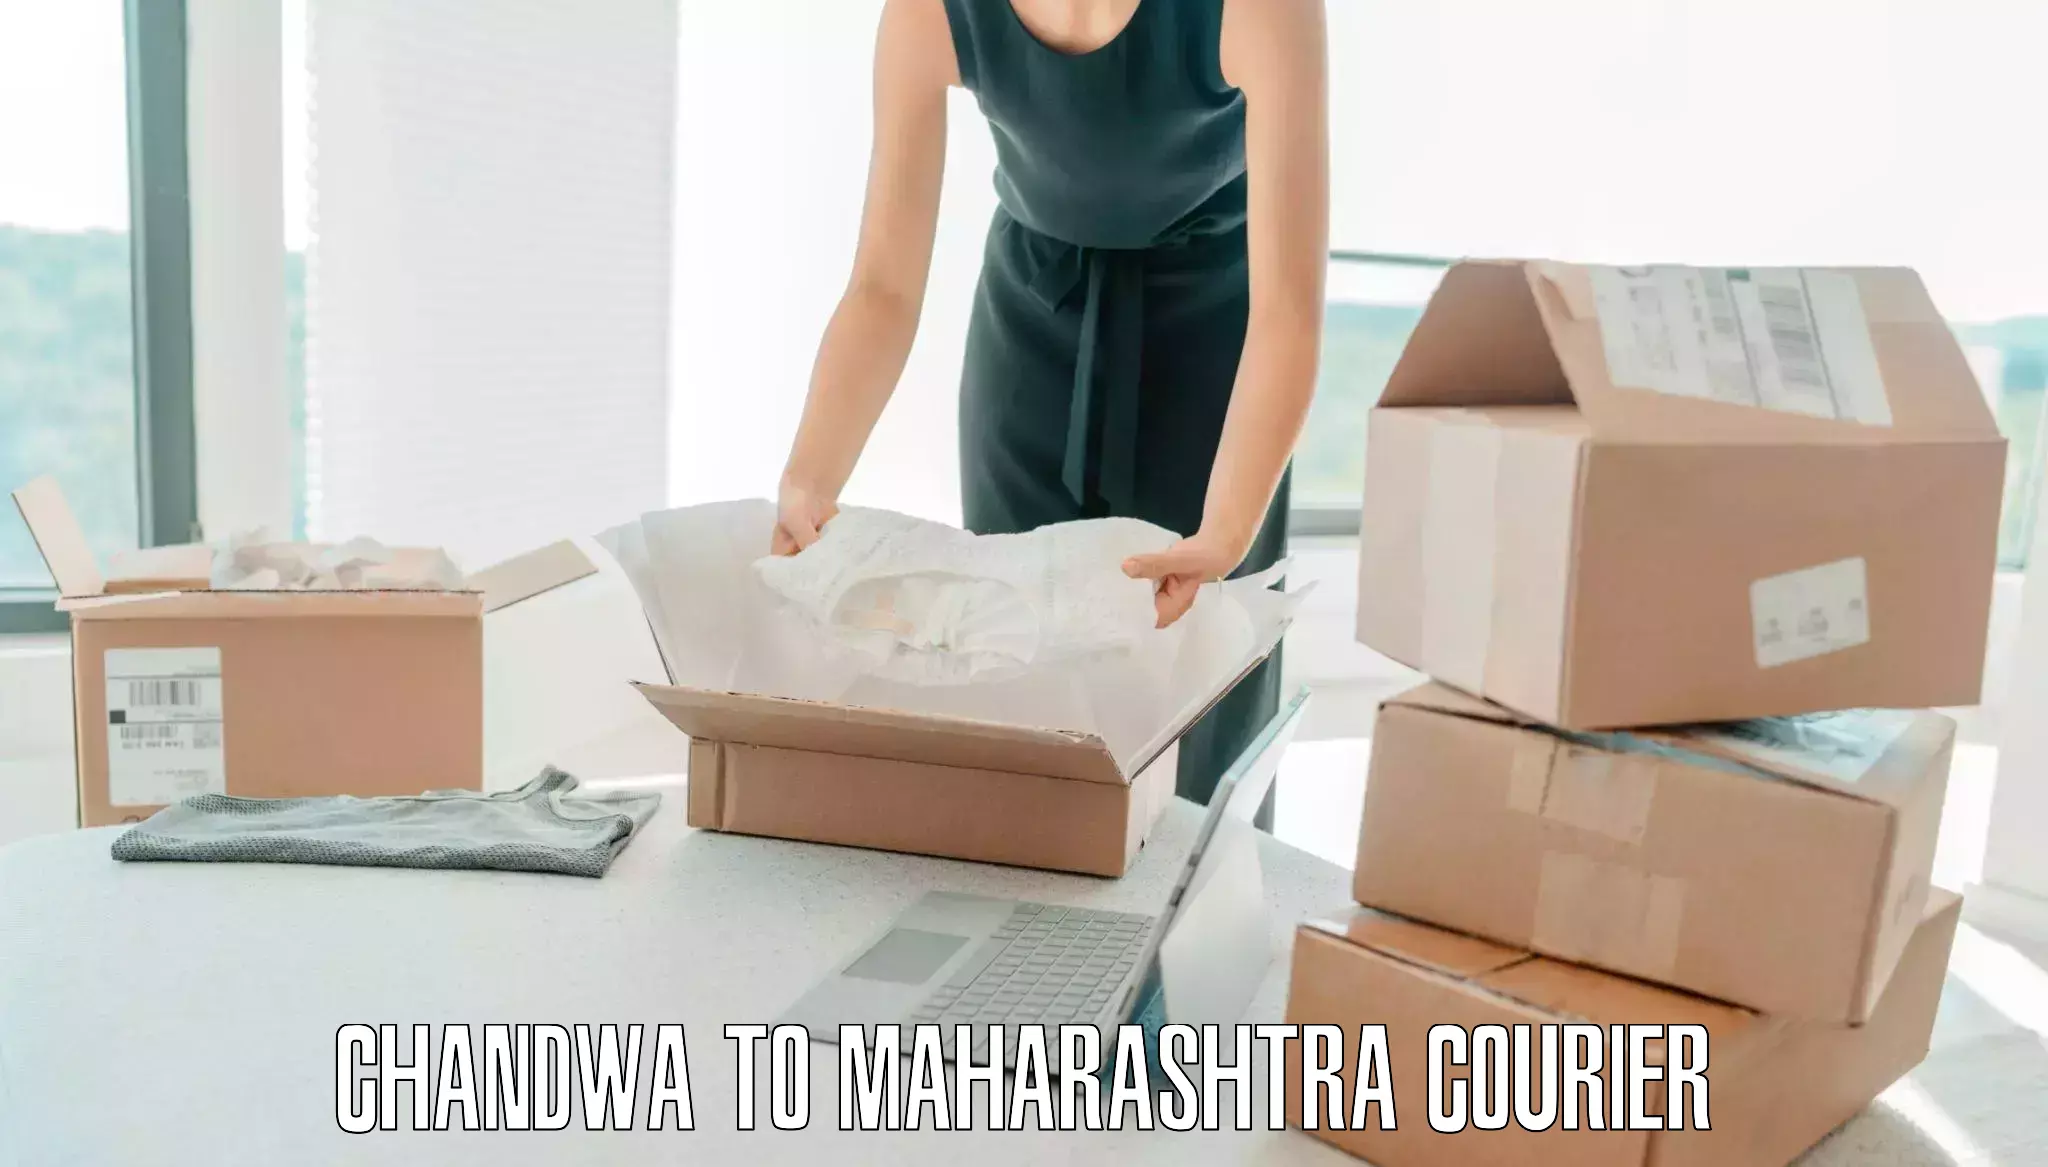 Baggage shipping advice Chandwa to Thane